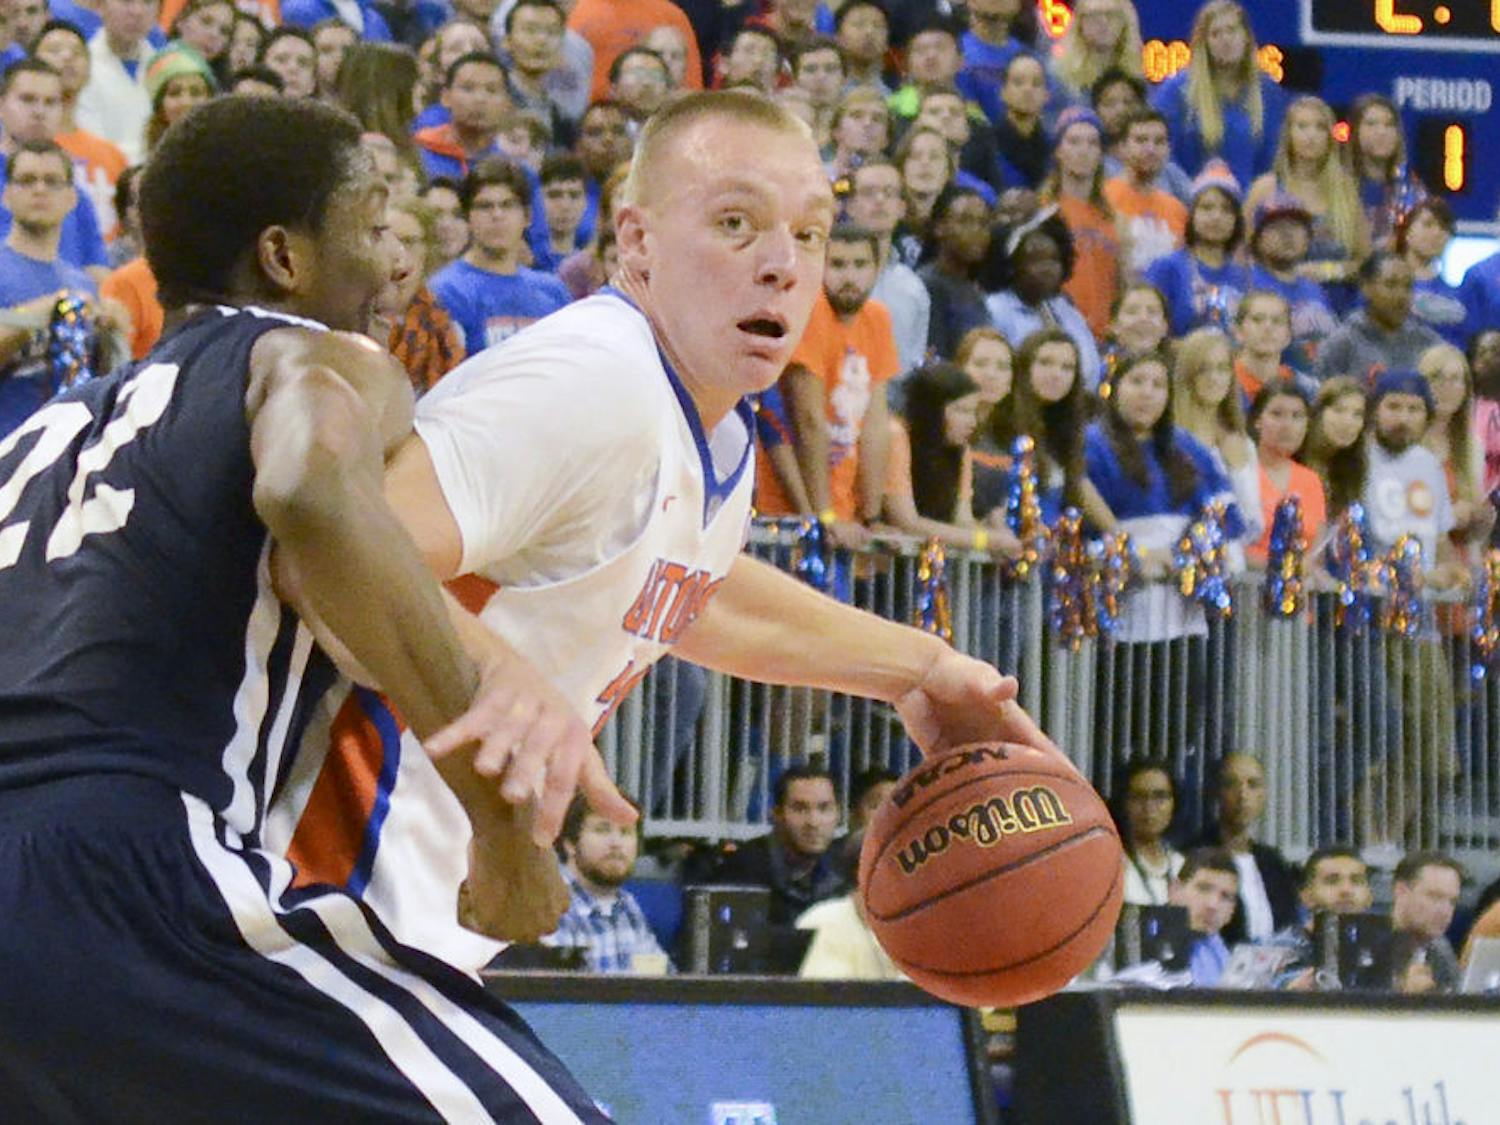 Jacob Kurtz dribbles the ball during Florida’s 85-47 win against Yale in the O’Connell Center.&nbsp;